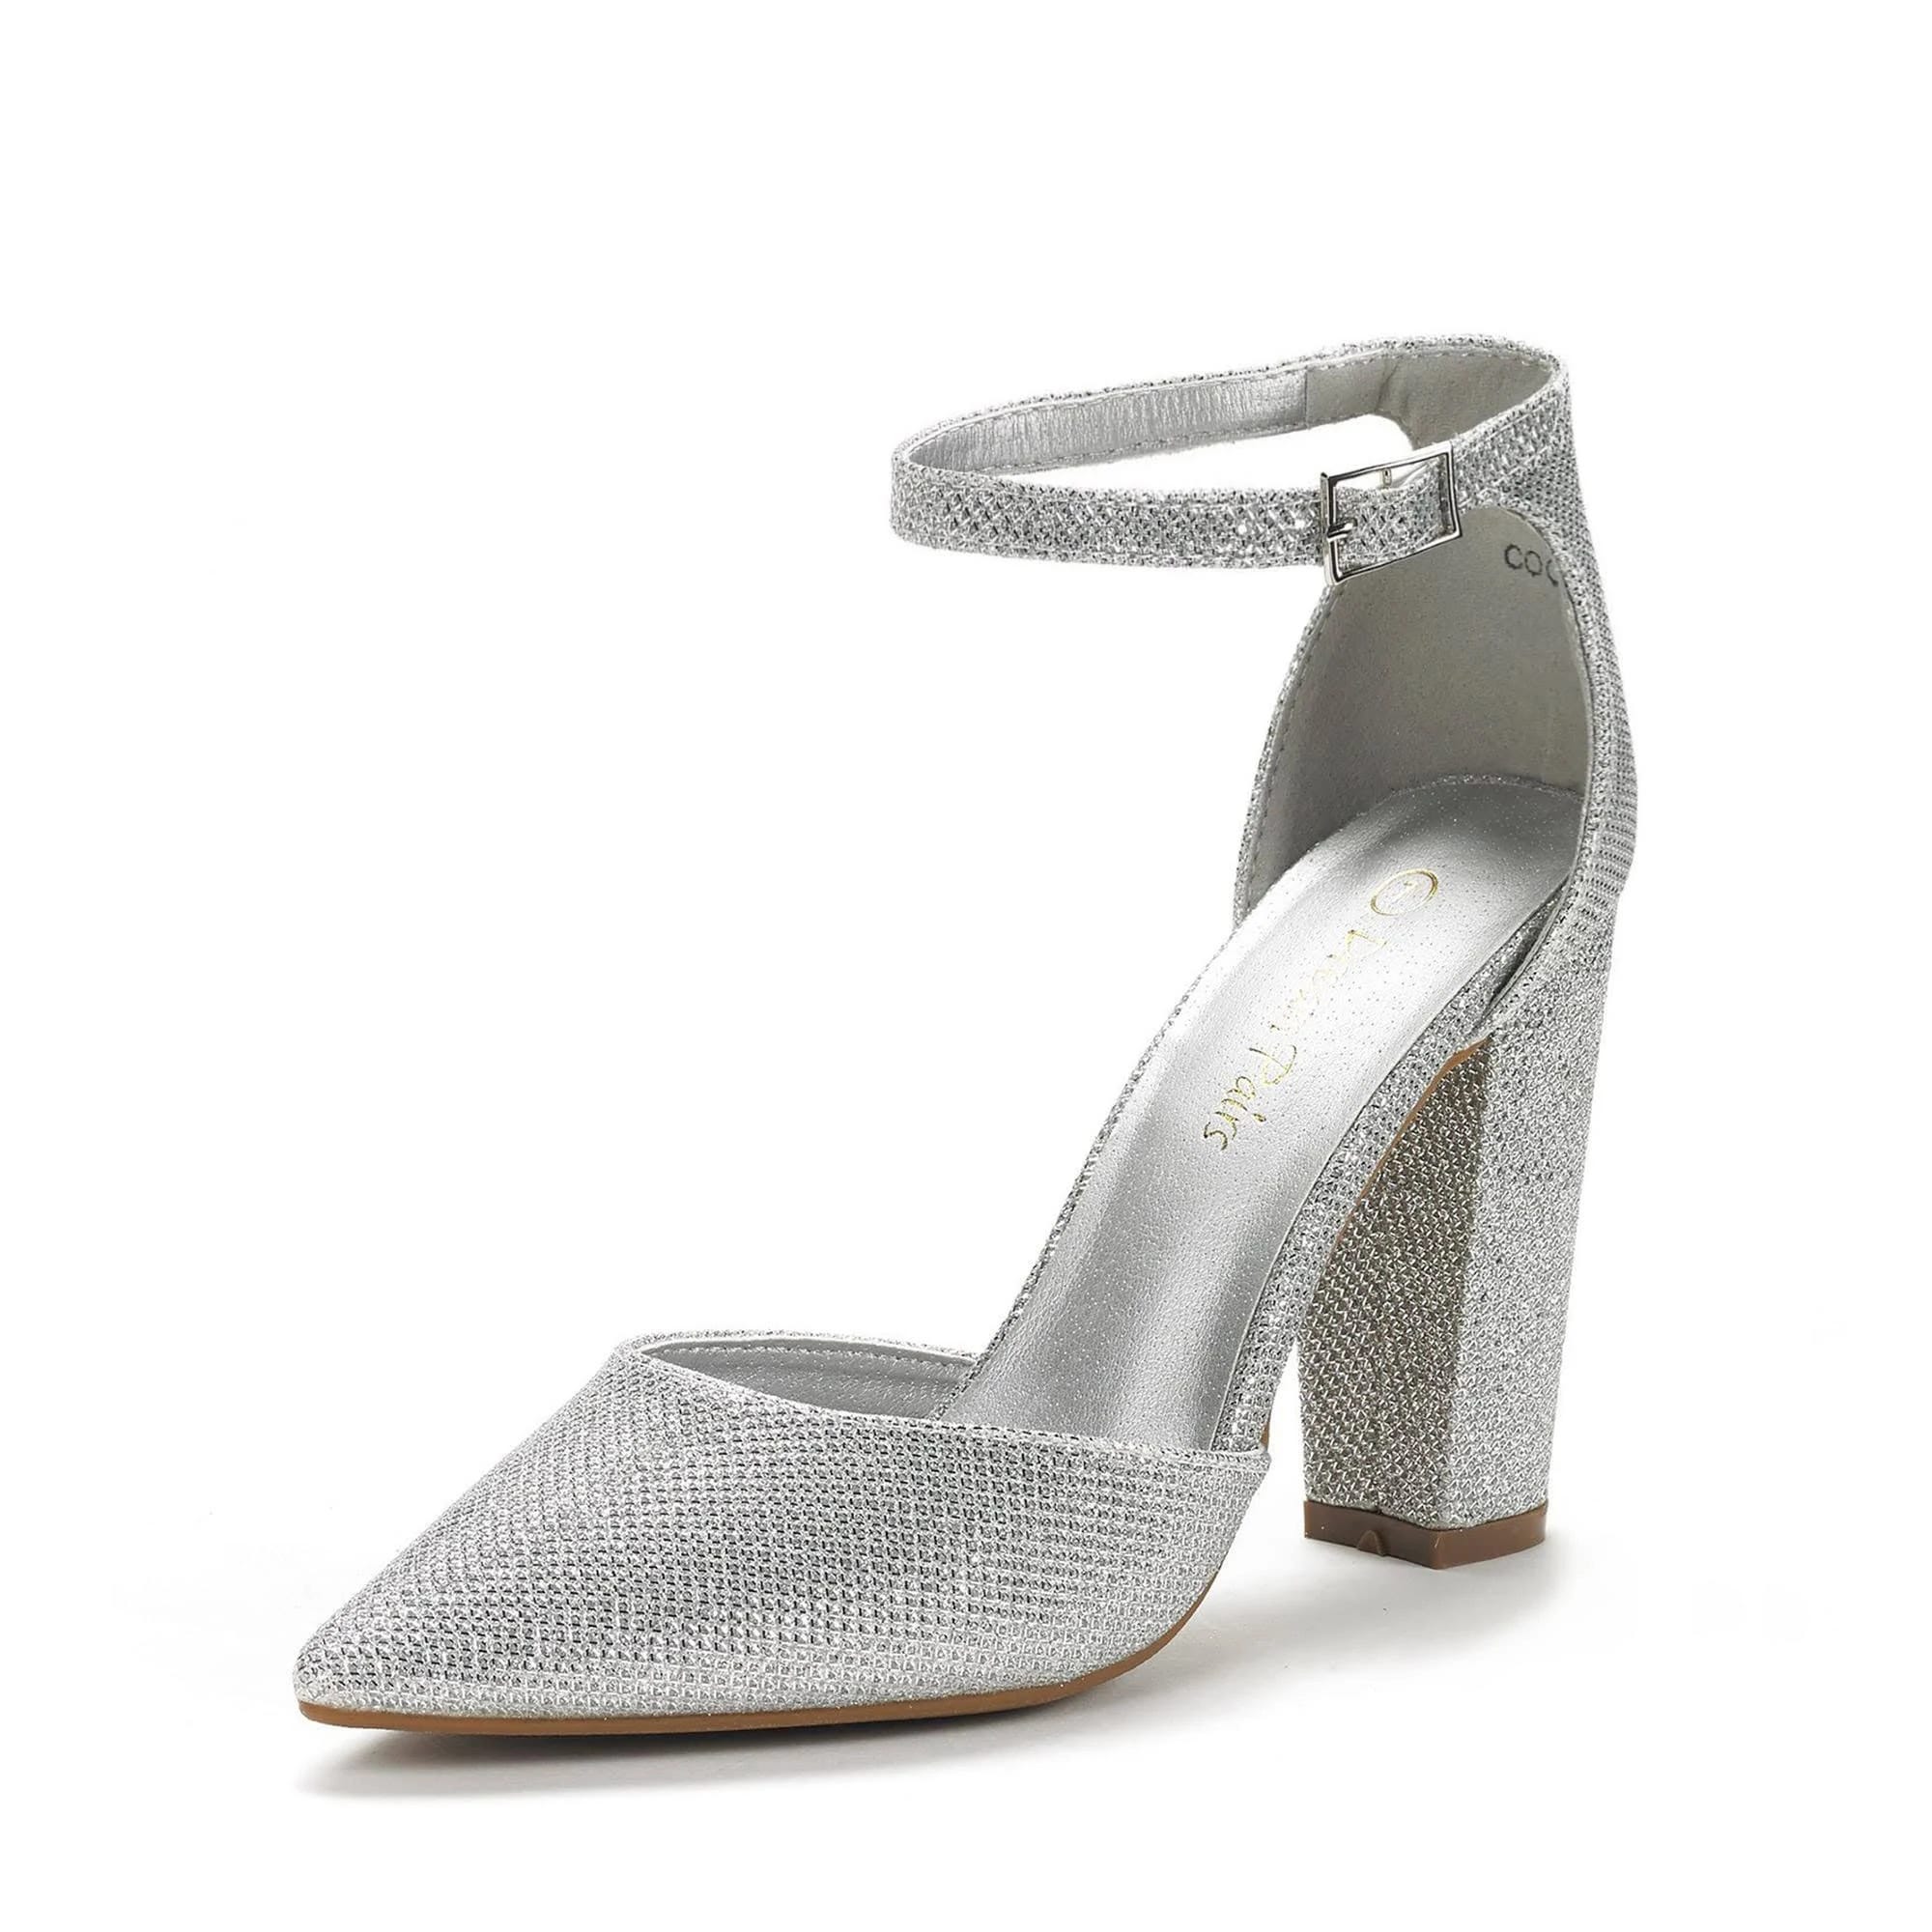 Chic Coco Block Heel Pump with Adjustable Strap and Padded Insole | Image